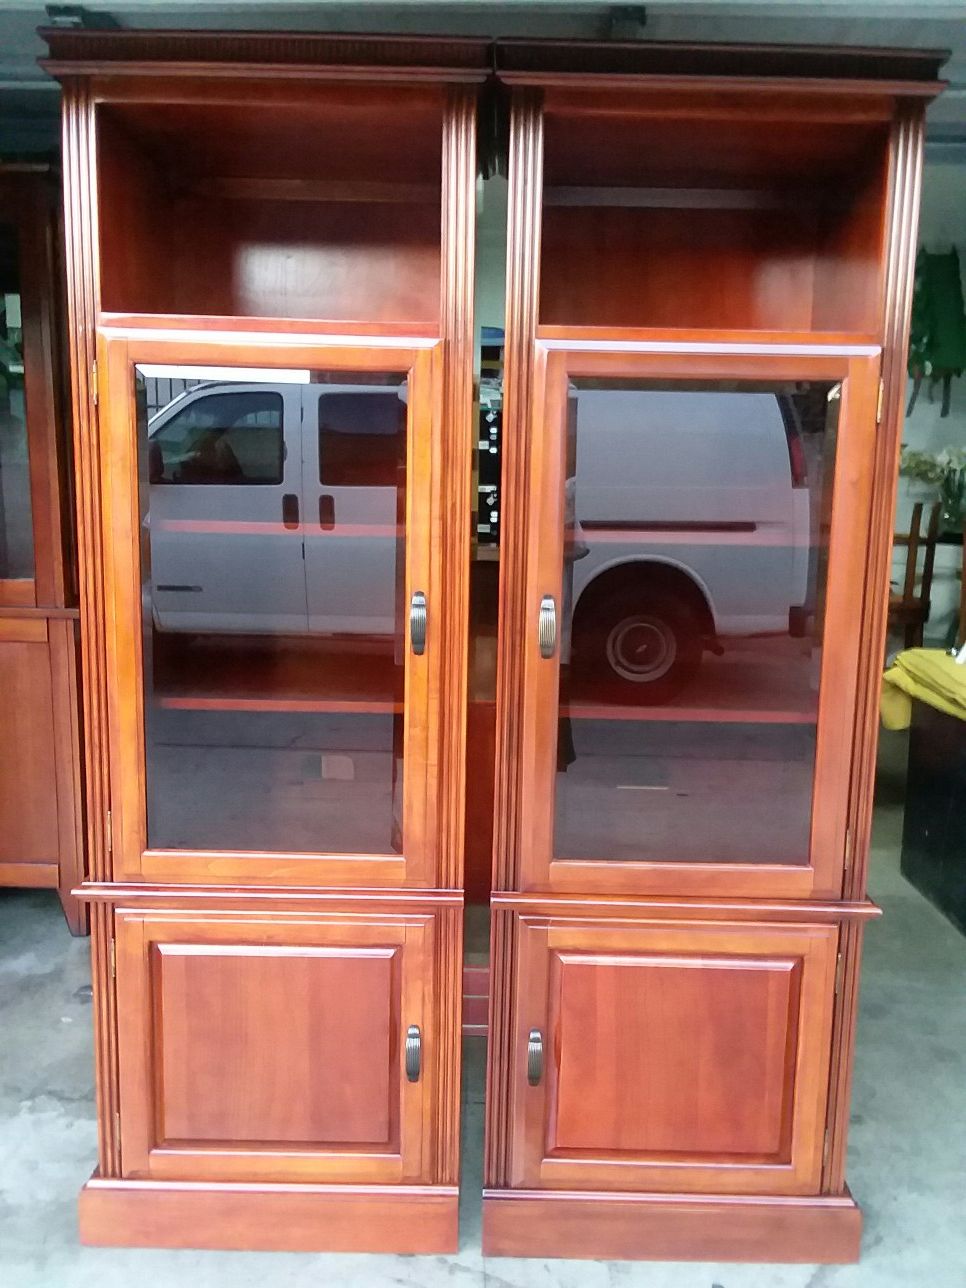 BEAUTIFUL TOWERS IN MAHOGANY COLOR $80 each